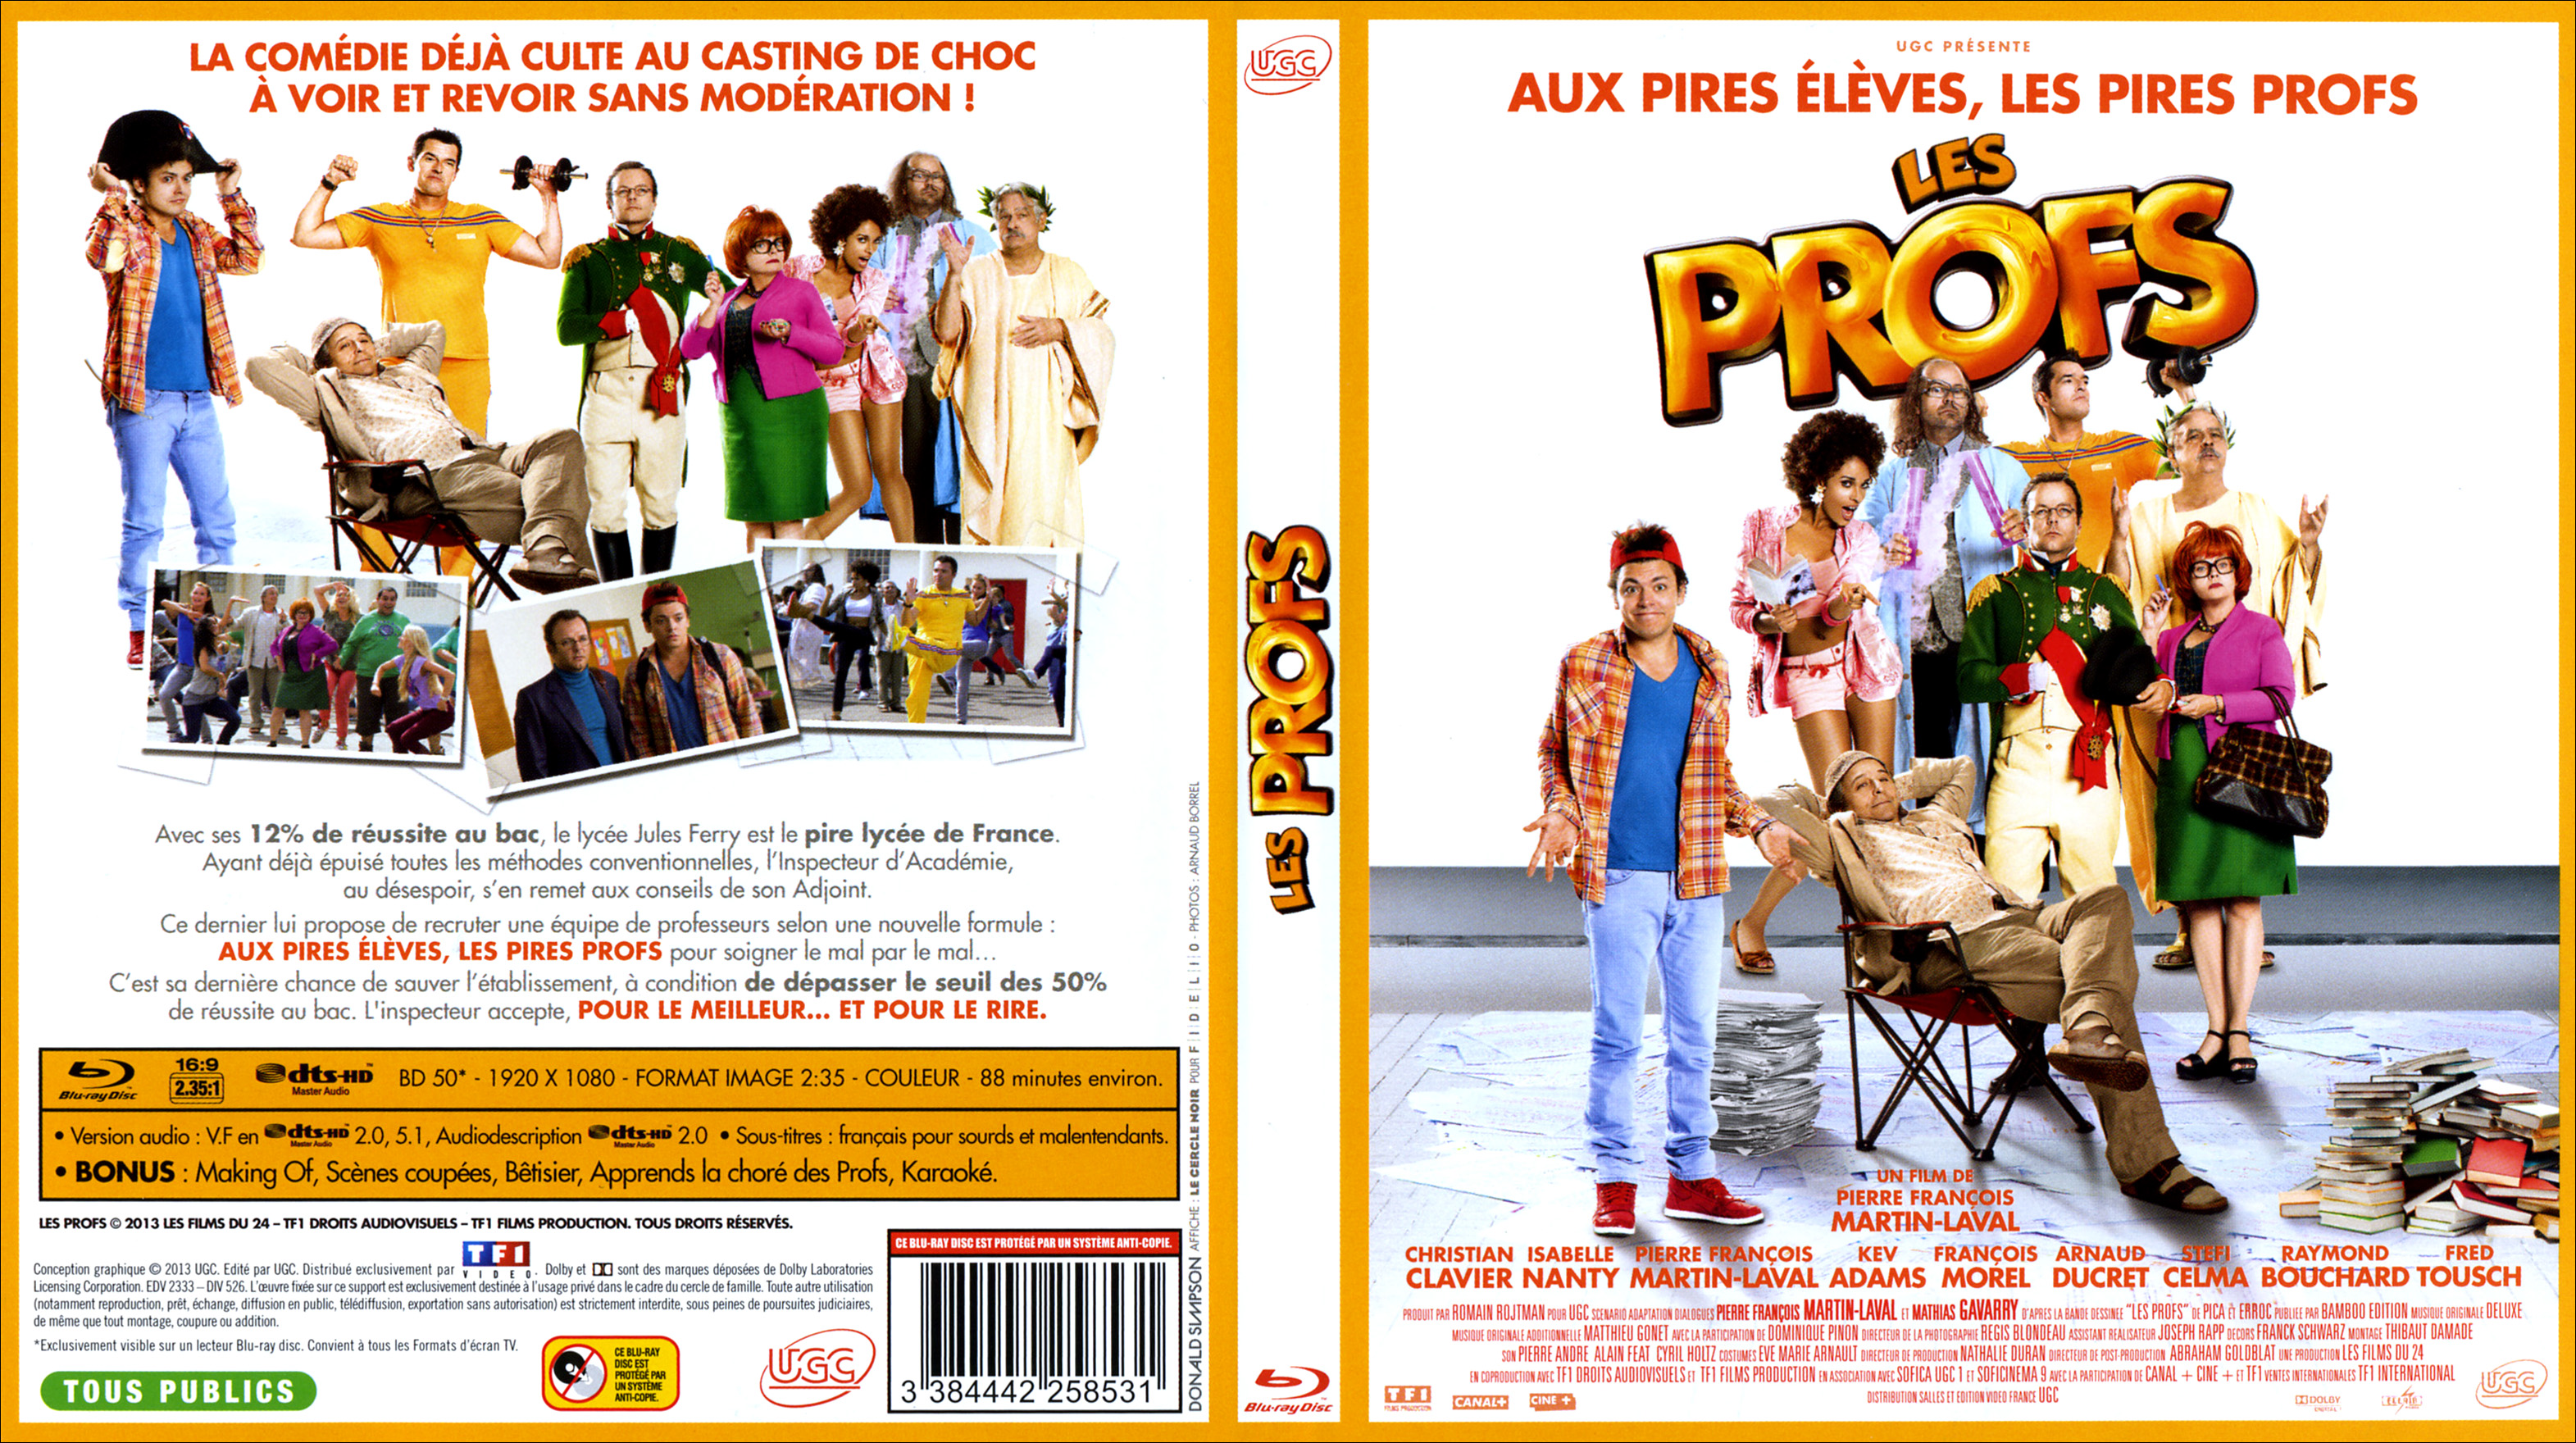 Jaquette DVD Les Profs (BLU-RAY)